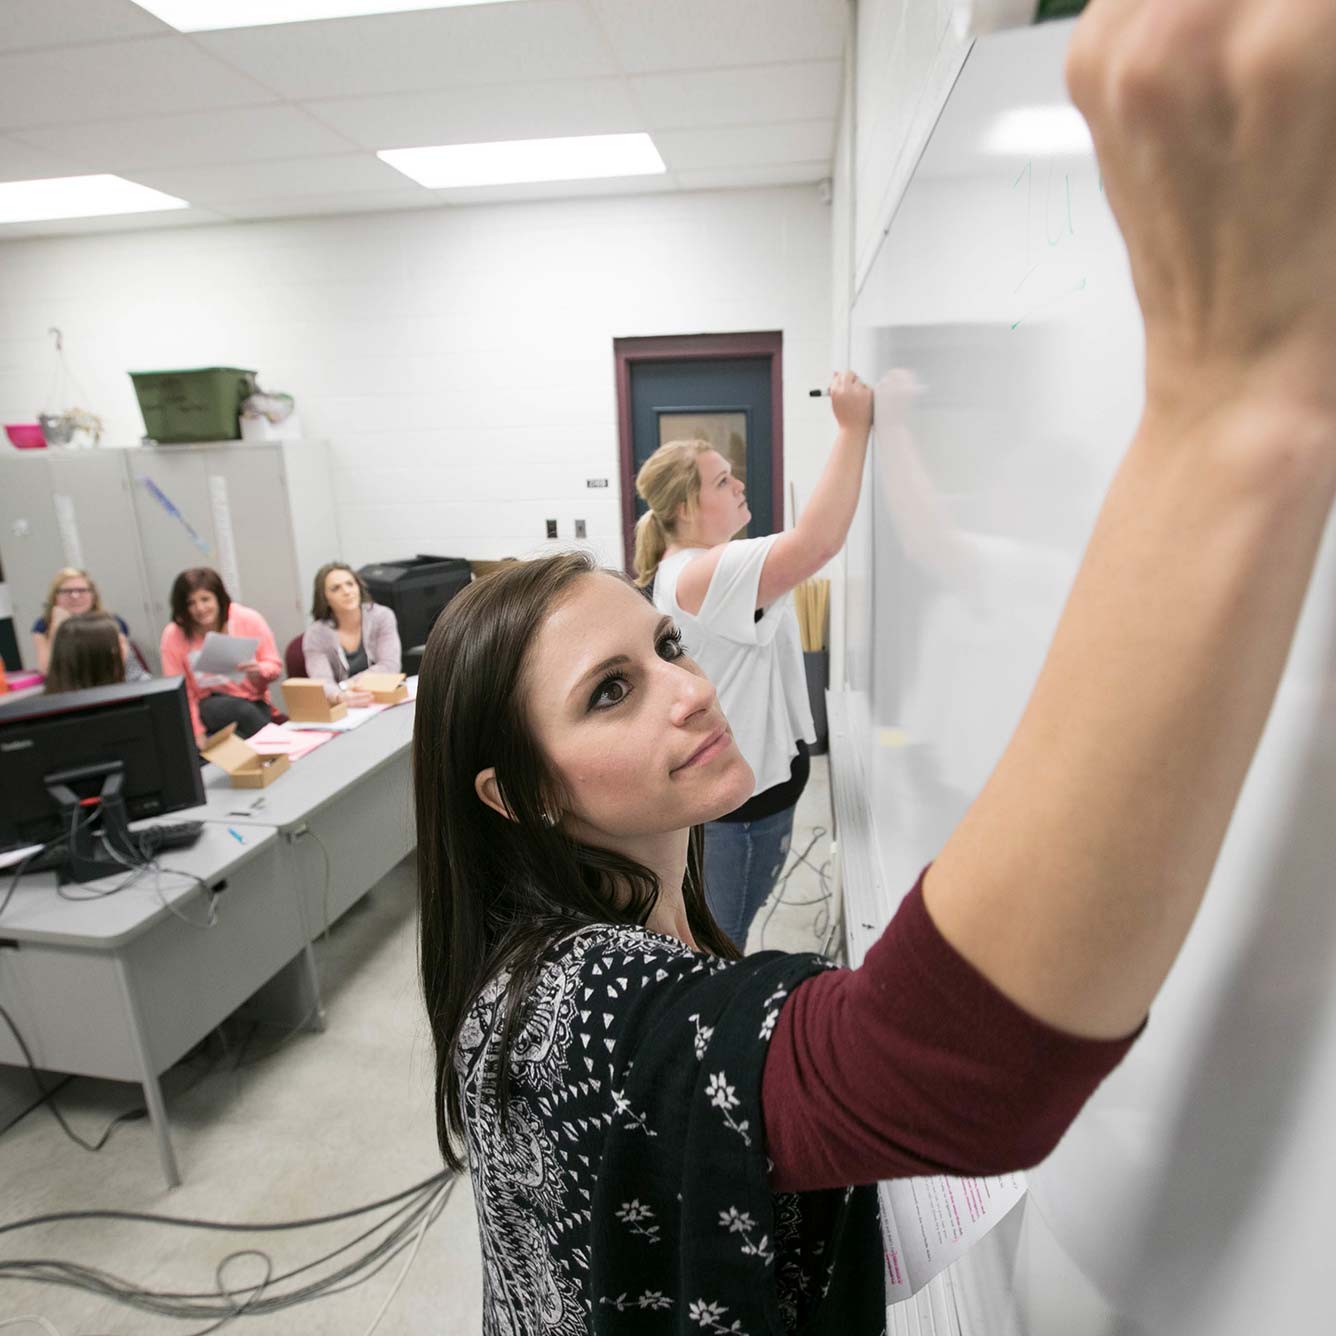 Two Missouri State education students write on a dry erase board during a class activity.